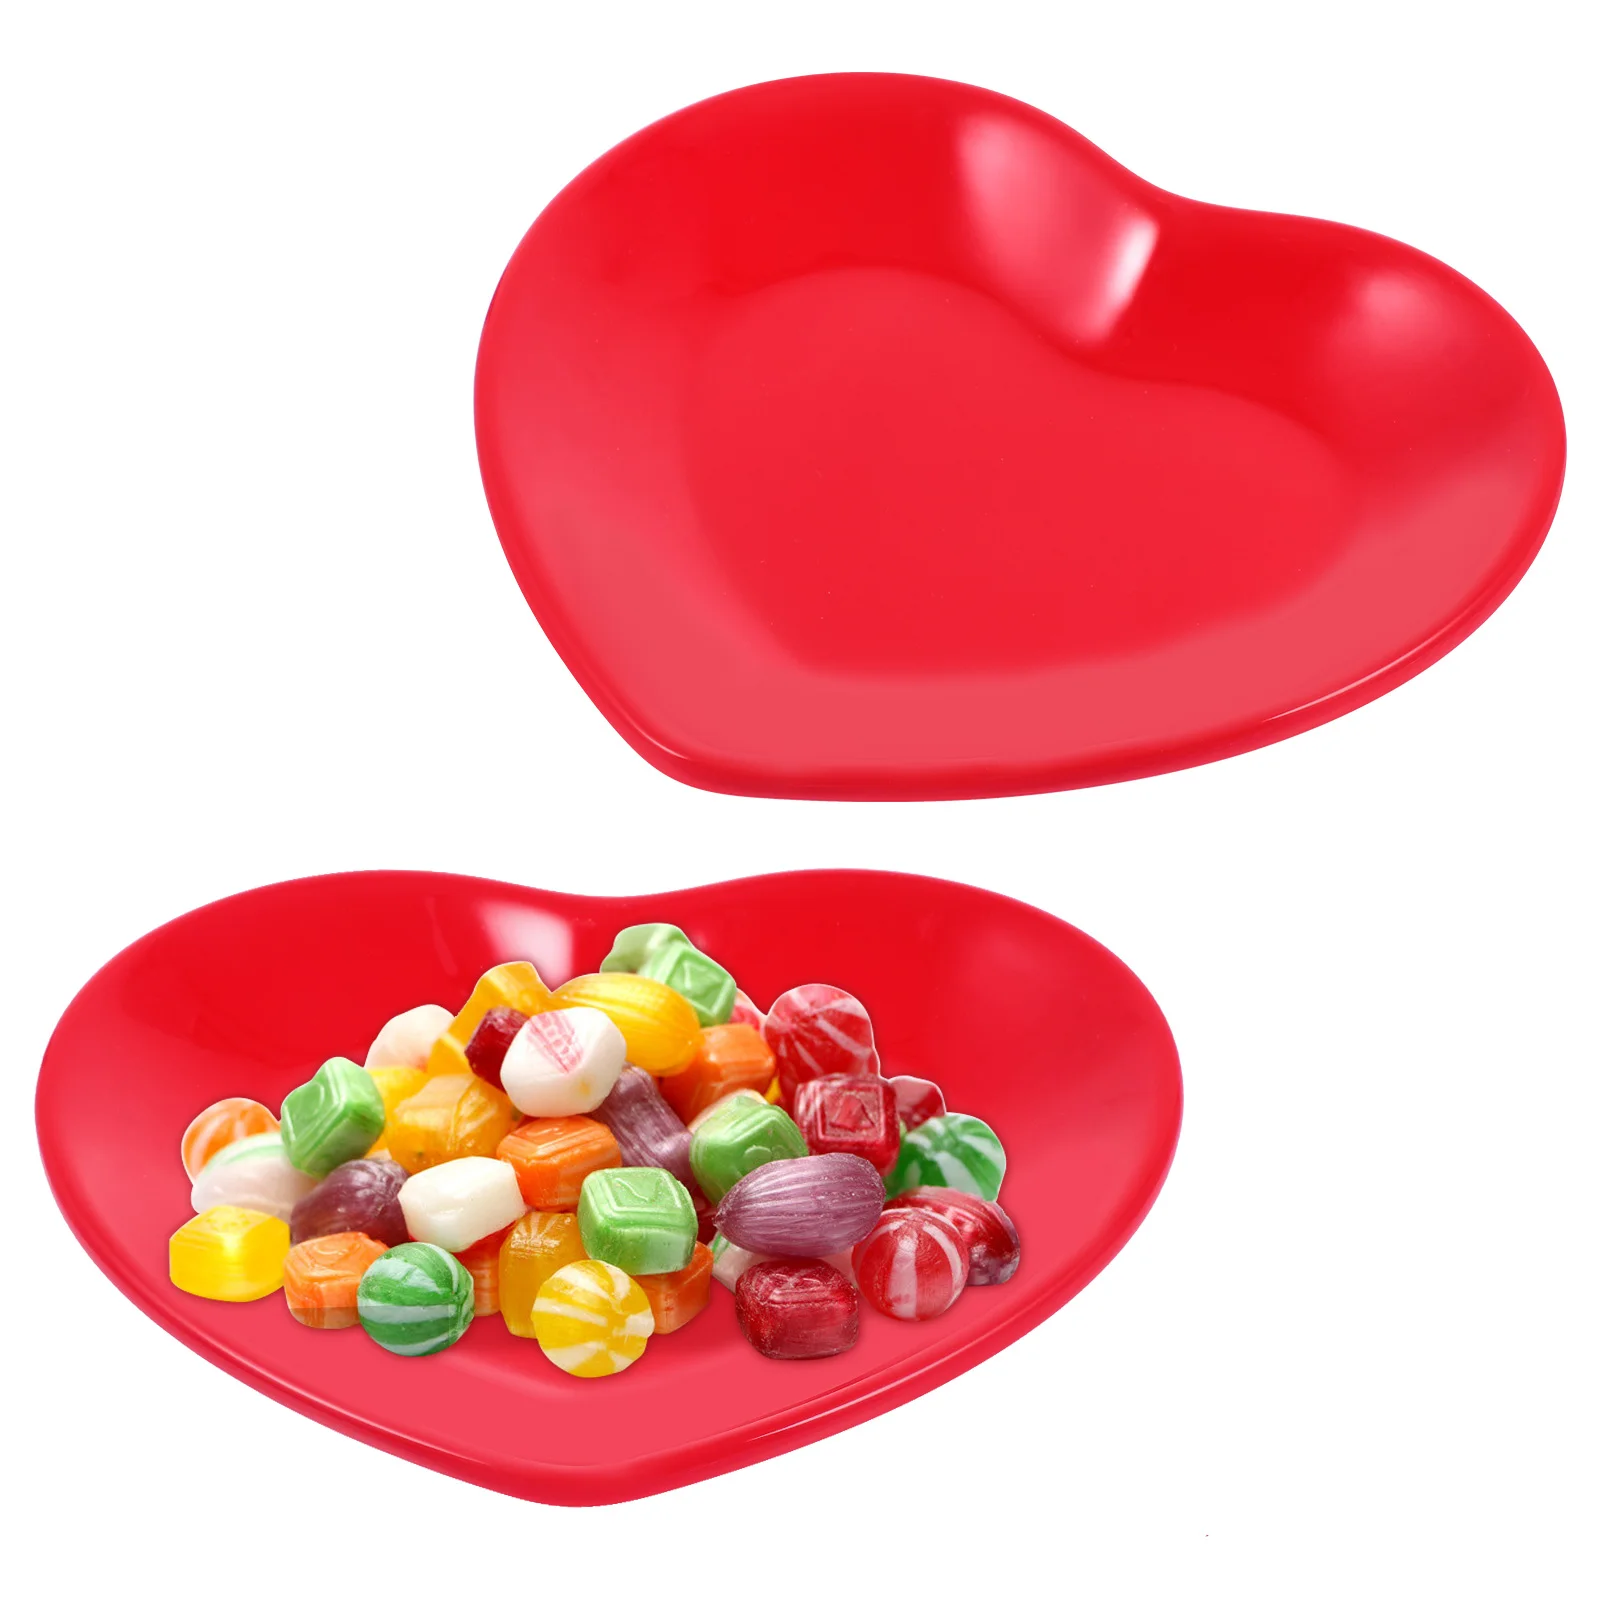 

Plates Tray Serving Dessert Heart Snack Dish Bread Dishes Trays Plate Fruit Salad Melamine Shaped Day Dinner Cake Severing Party